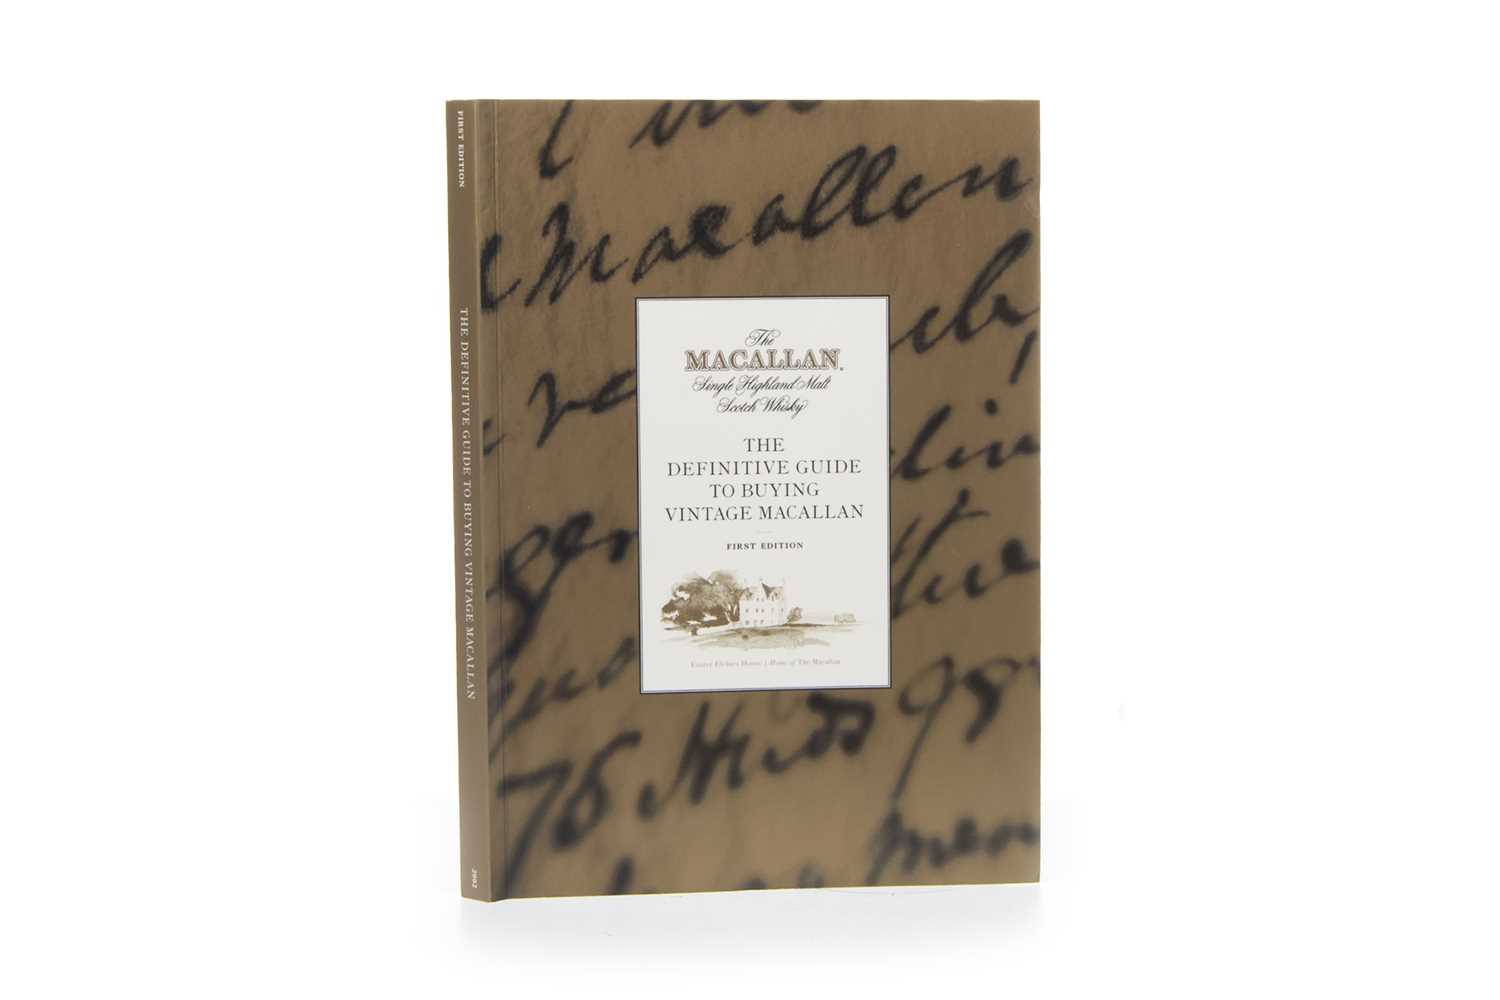 Lot 33 - THE DEFINITIVE GUIDE TO BUYING VINTAGE MACALLAN - FIRST EDITION